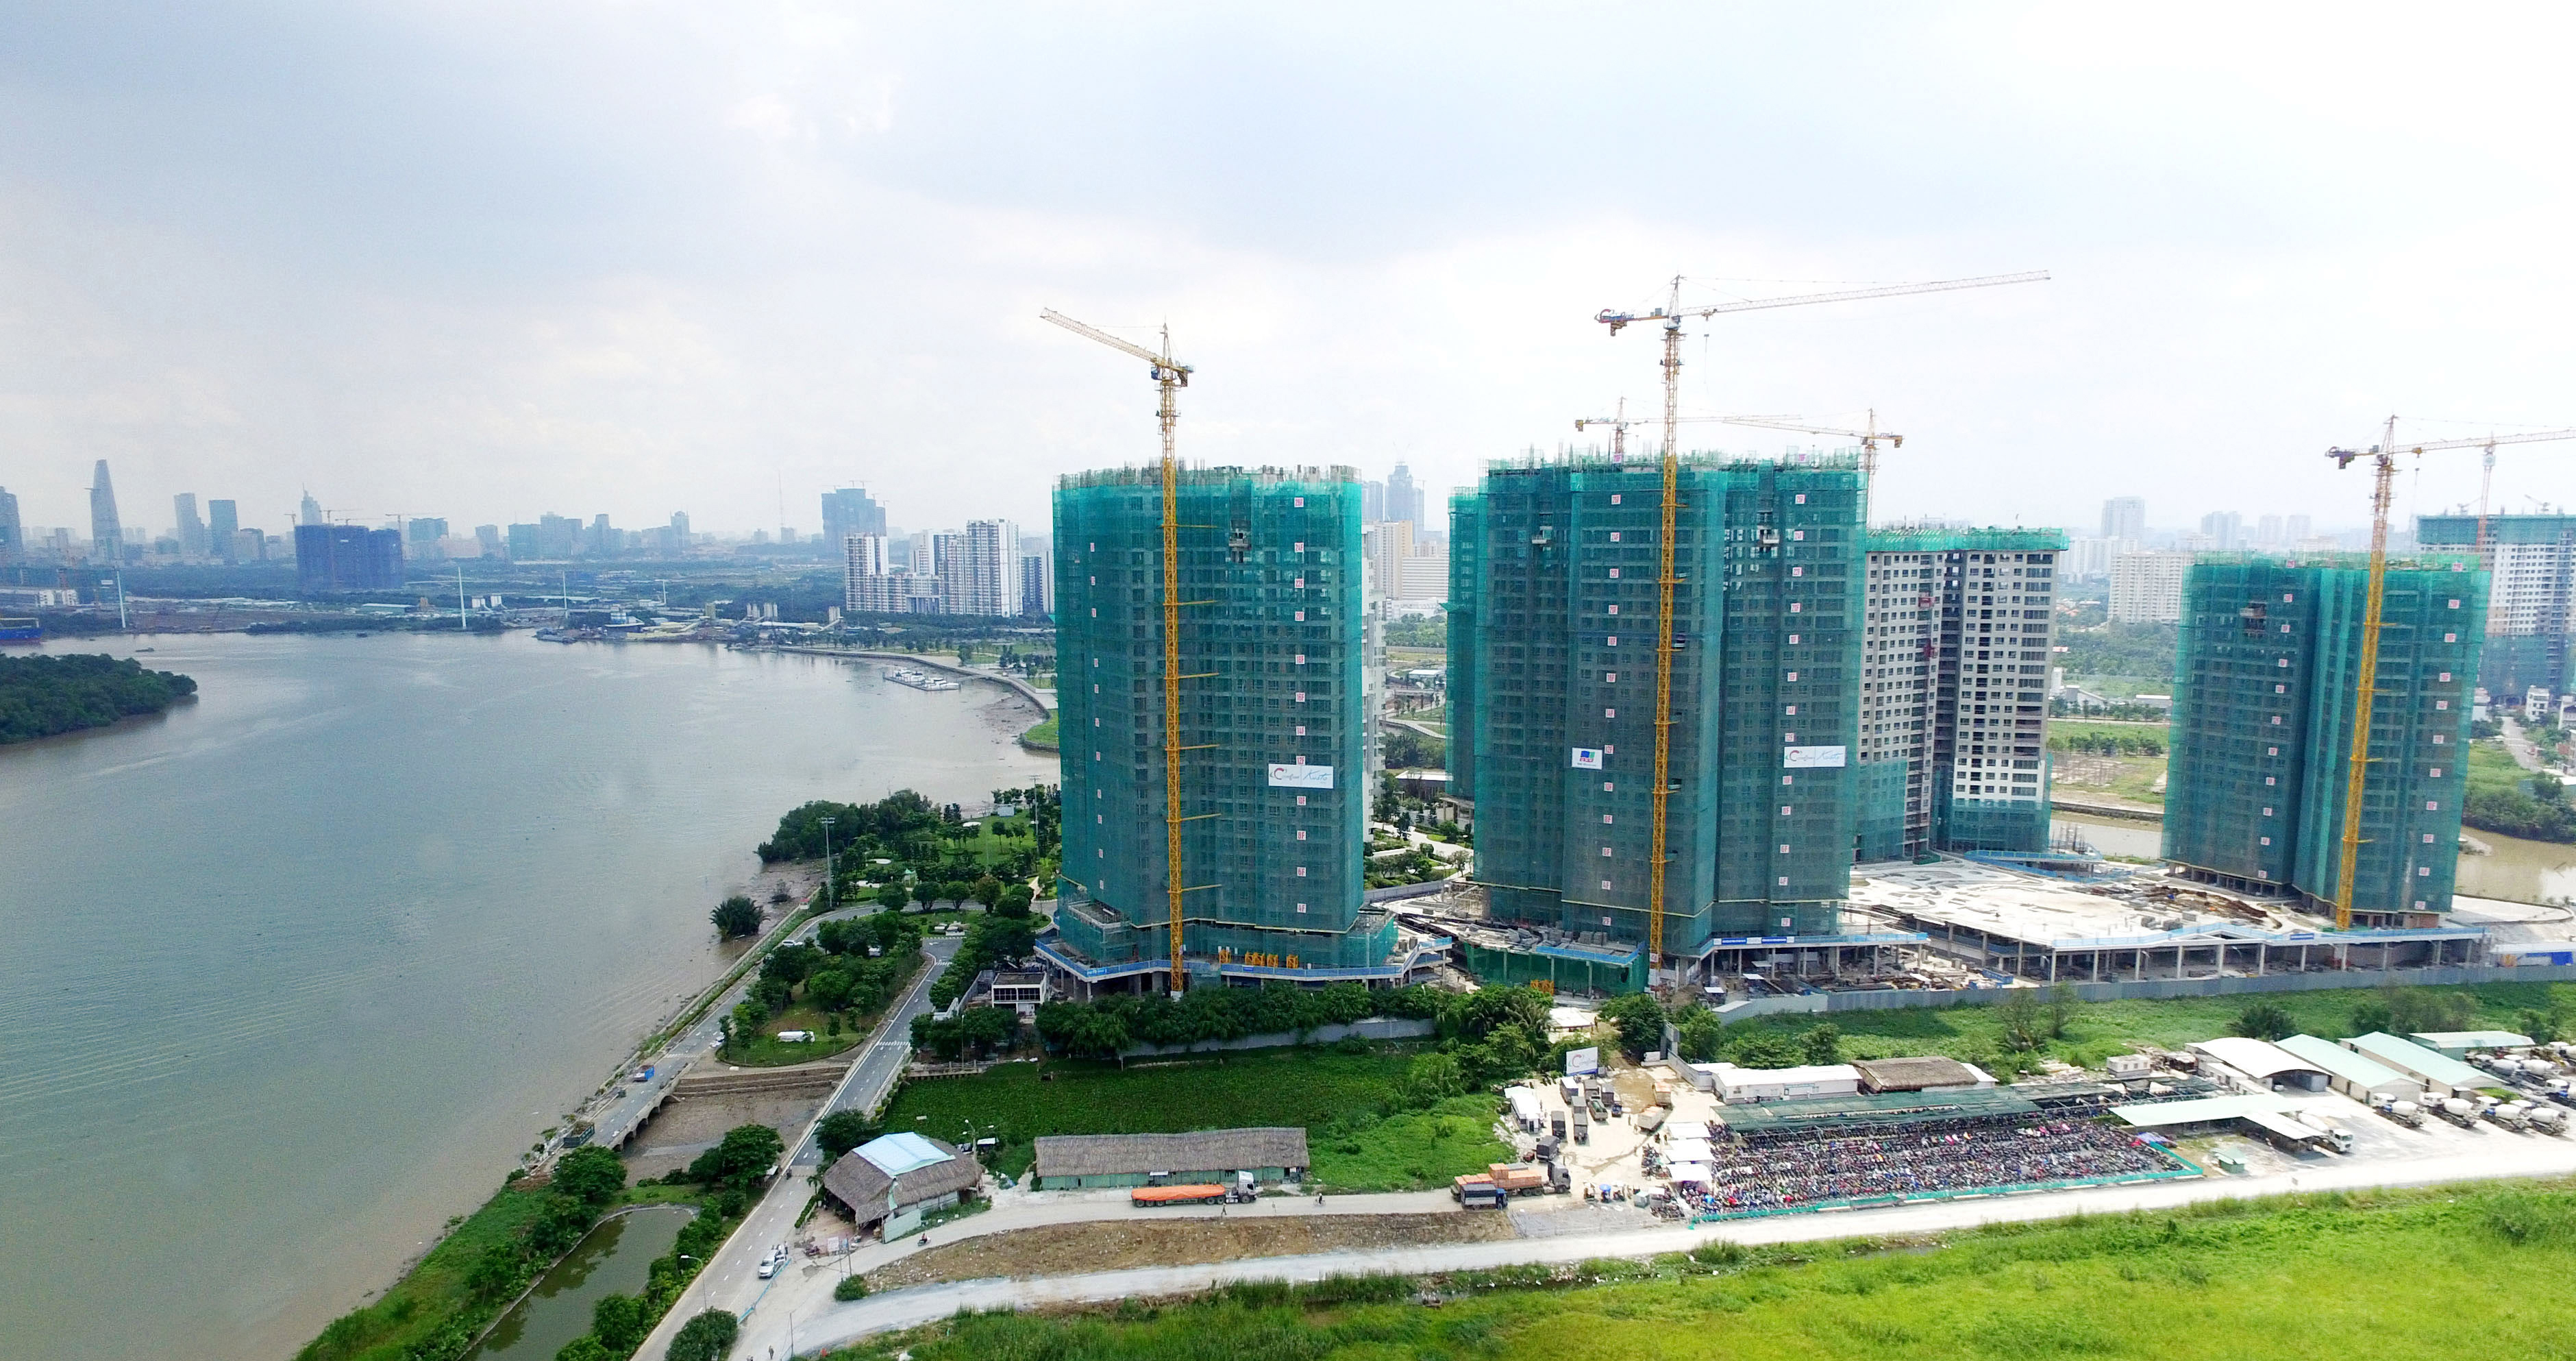 Phase II of Diamond Island officially topped-off